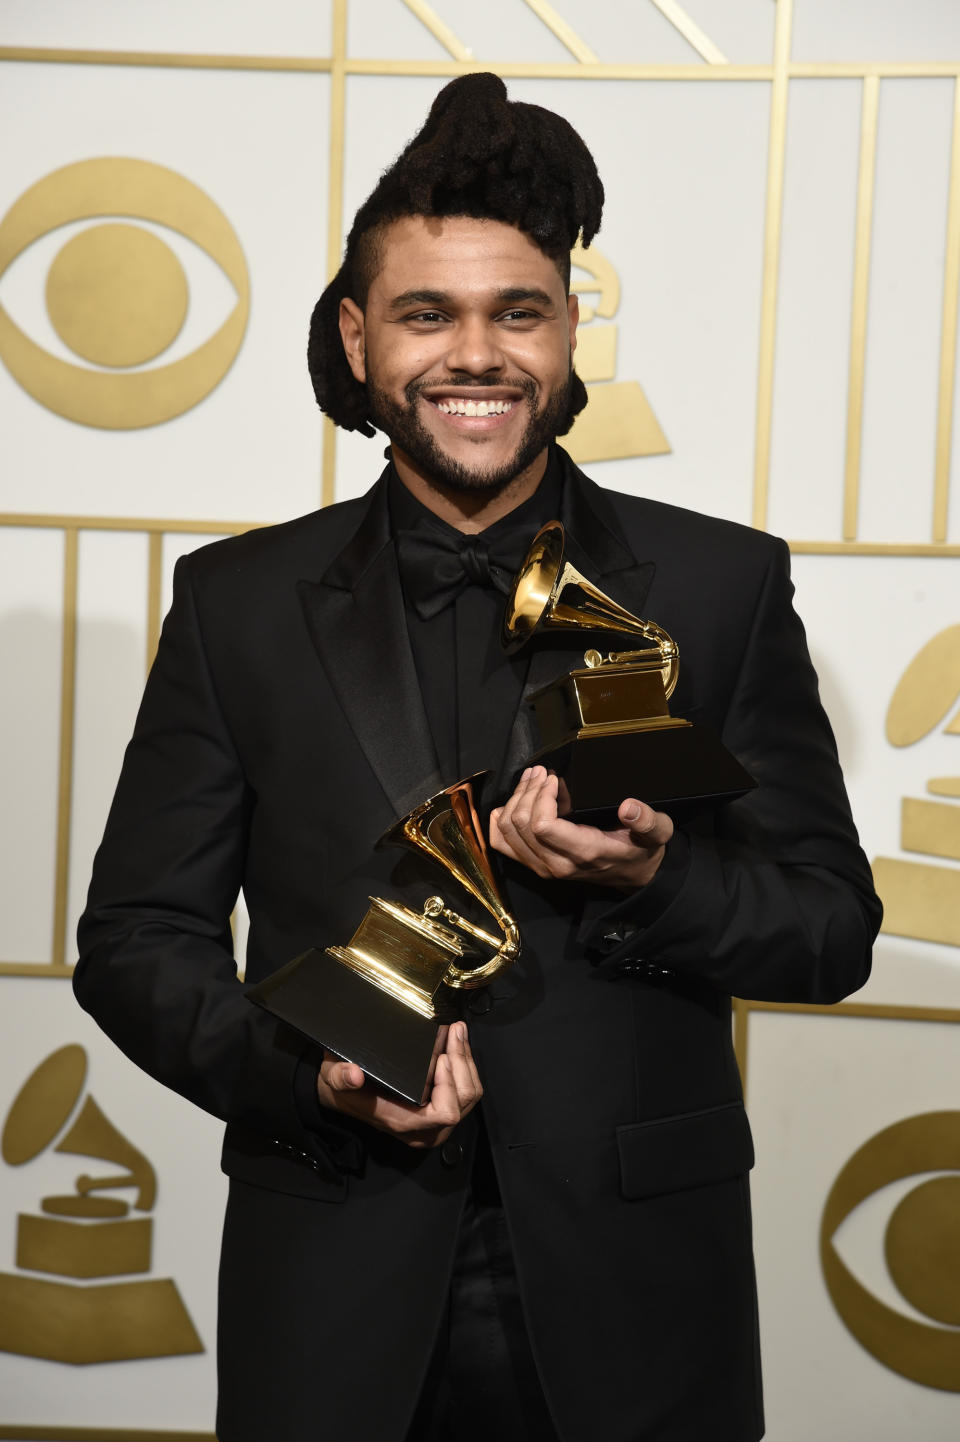 FILE - The Weeknd poses in the press room with the awards for best R&B performance for "Earned It (Fifty Shades of Grey)" and best urban contemporary album for "Beauty Behind The Madness" at the 58th annual Grammy Awards in Los Angeles on Feb. 15, 2016. The Weeknd had the No. 1 song of 2020 but “Blinding Lights” was not nominated for a Grammy Award. (Photo by Chris Pizzello/Invision/AP, File)